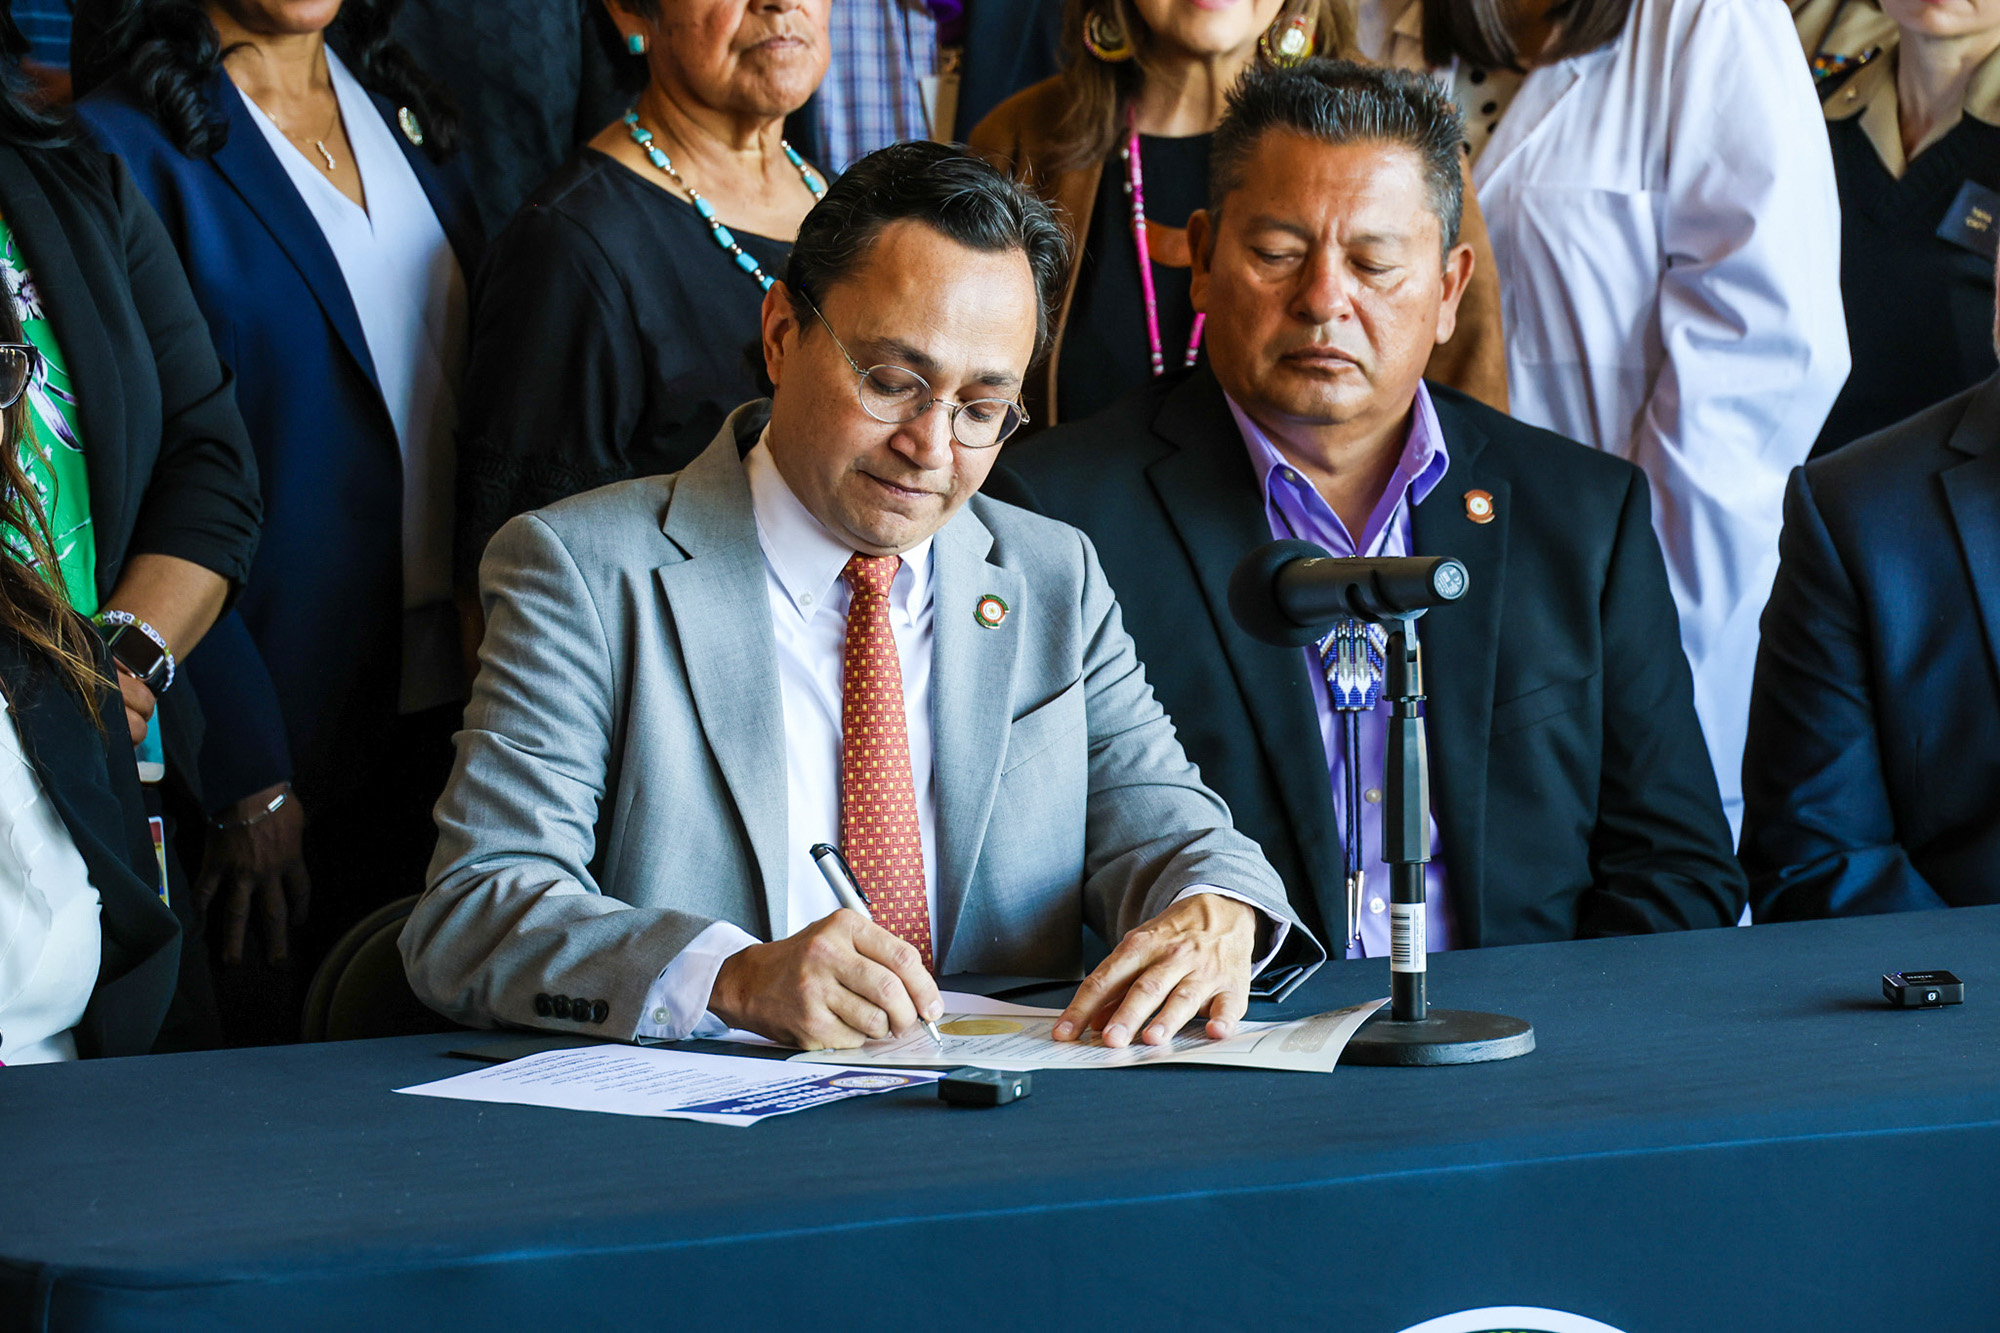 Chuck Hoskin: Cherokee Nation calls for change at National Congress of American Indians